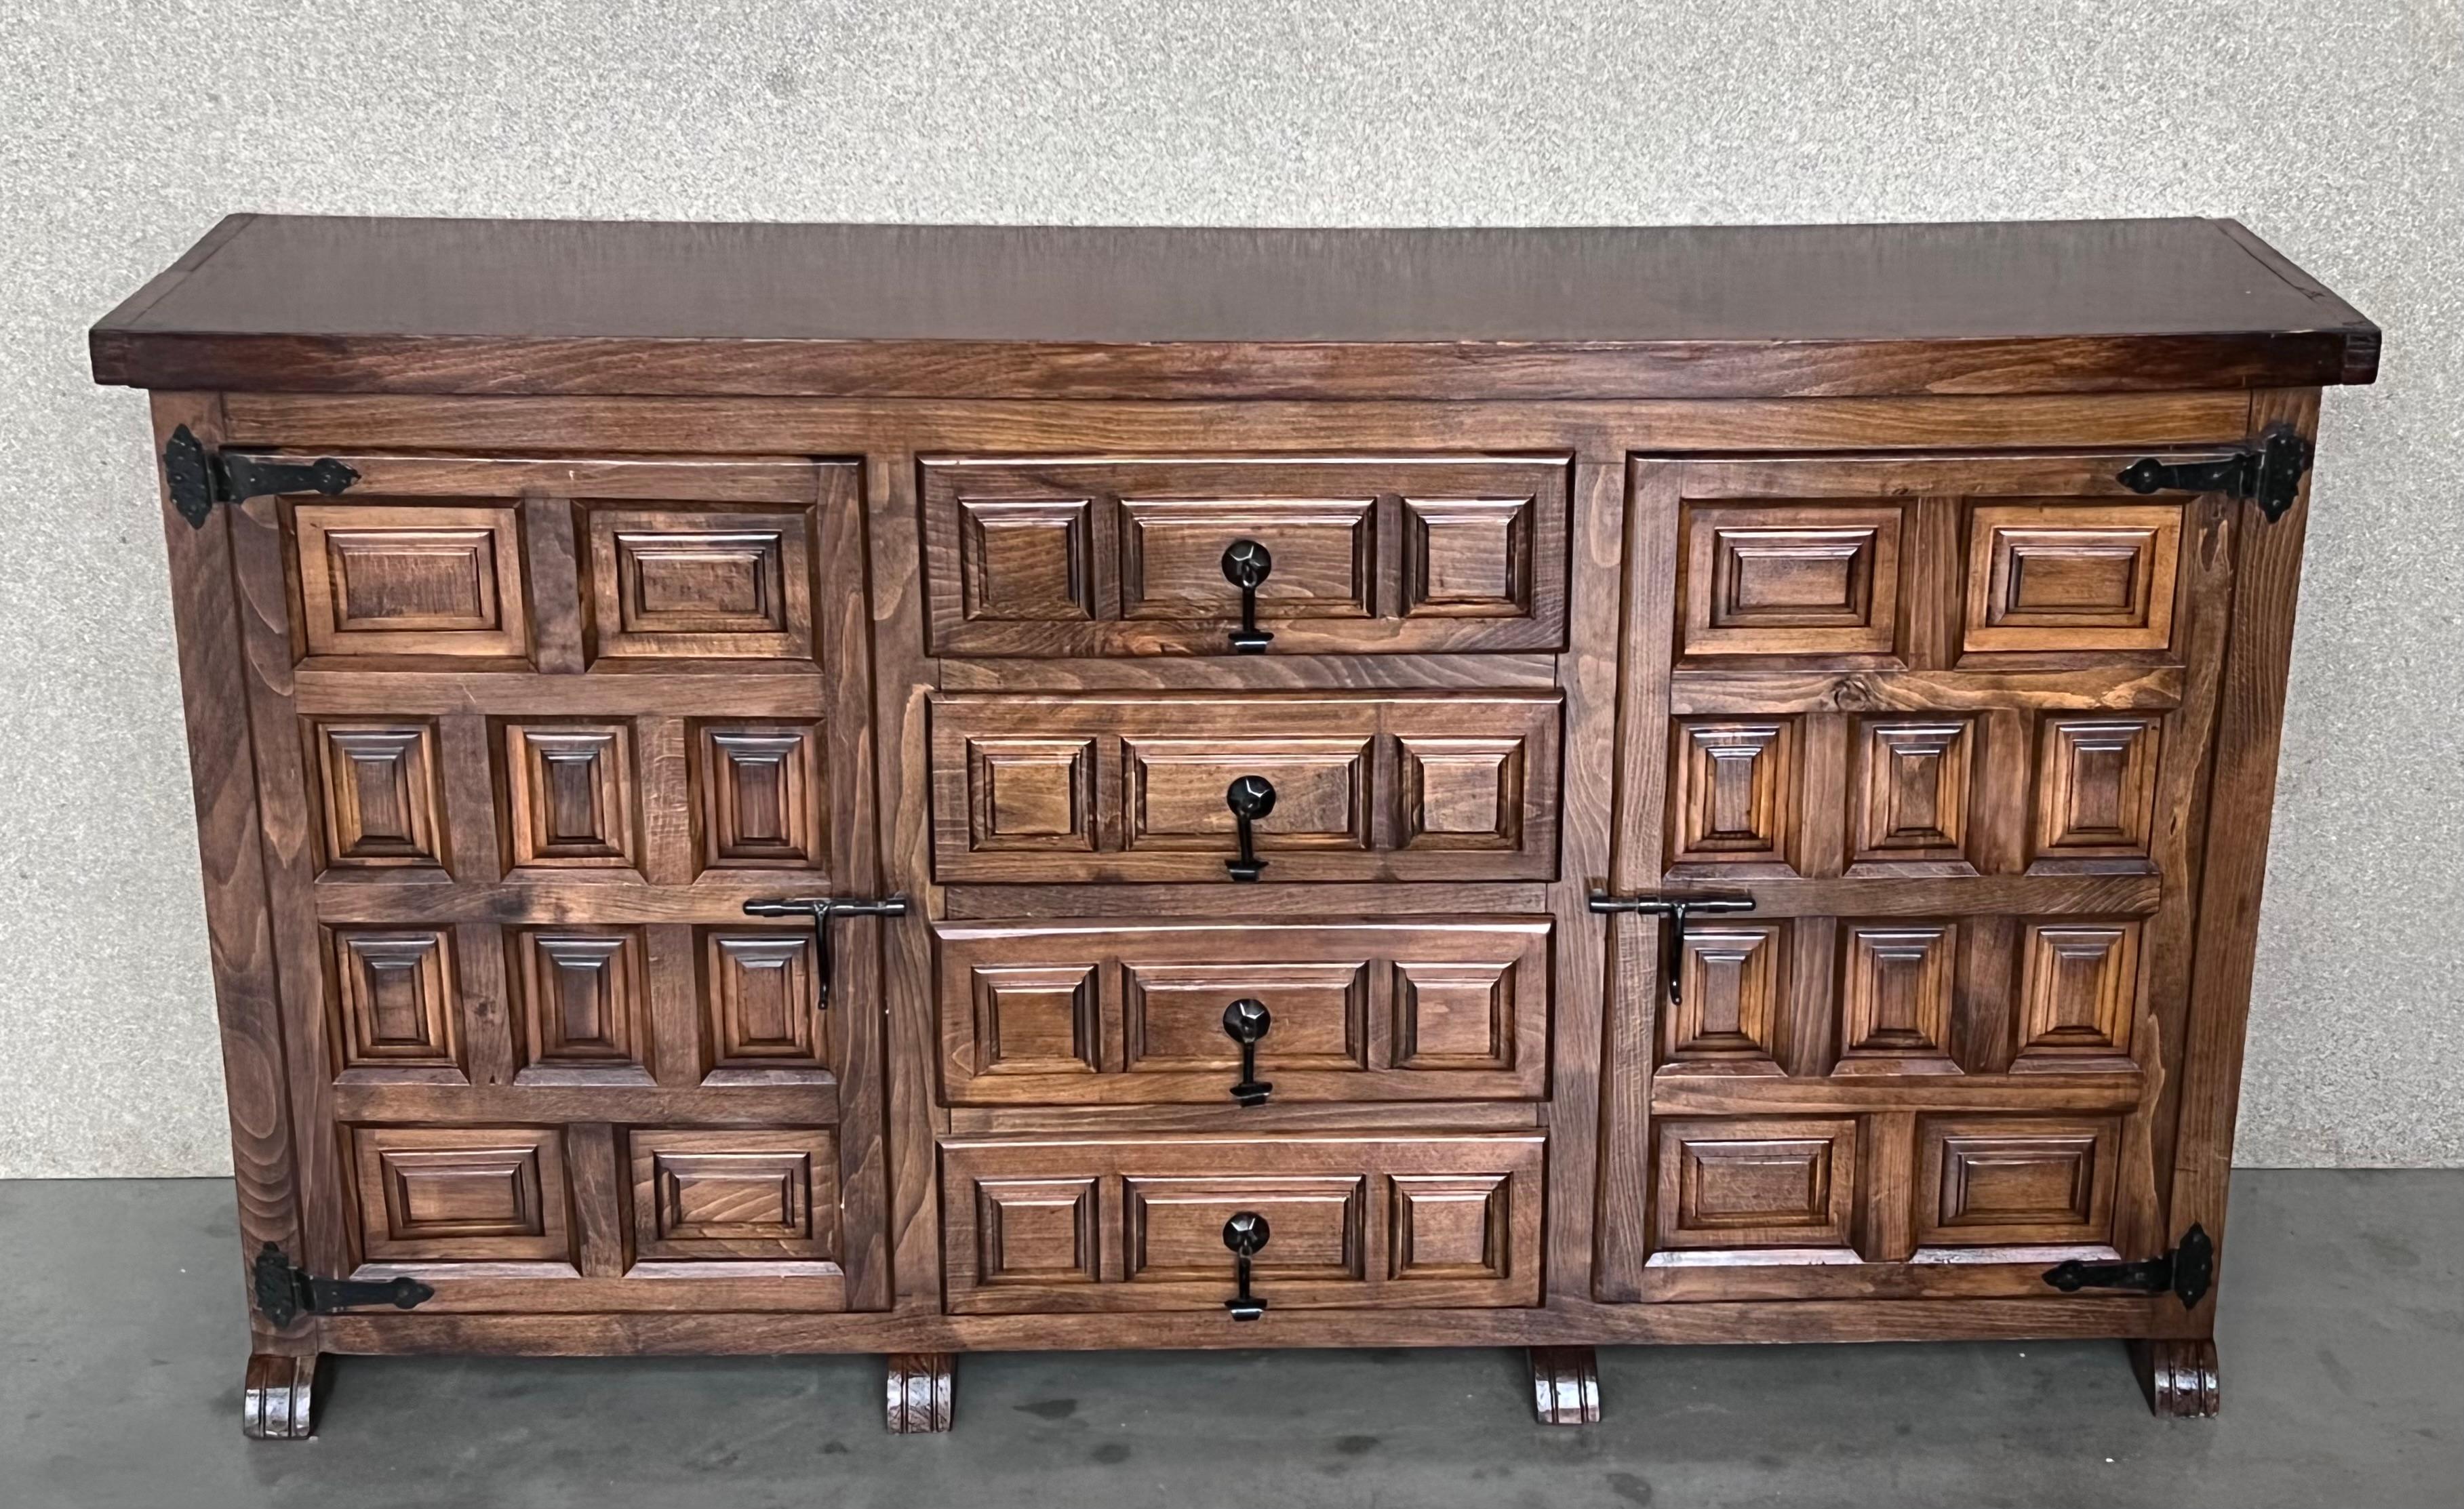 Spanish Colonial Spanish Buffet or Cabinet with Thre Doors and Central Drawers with Iron Hardware For Sale